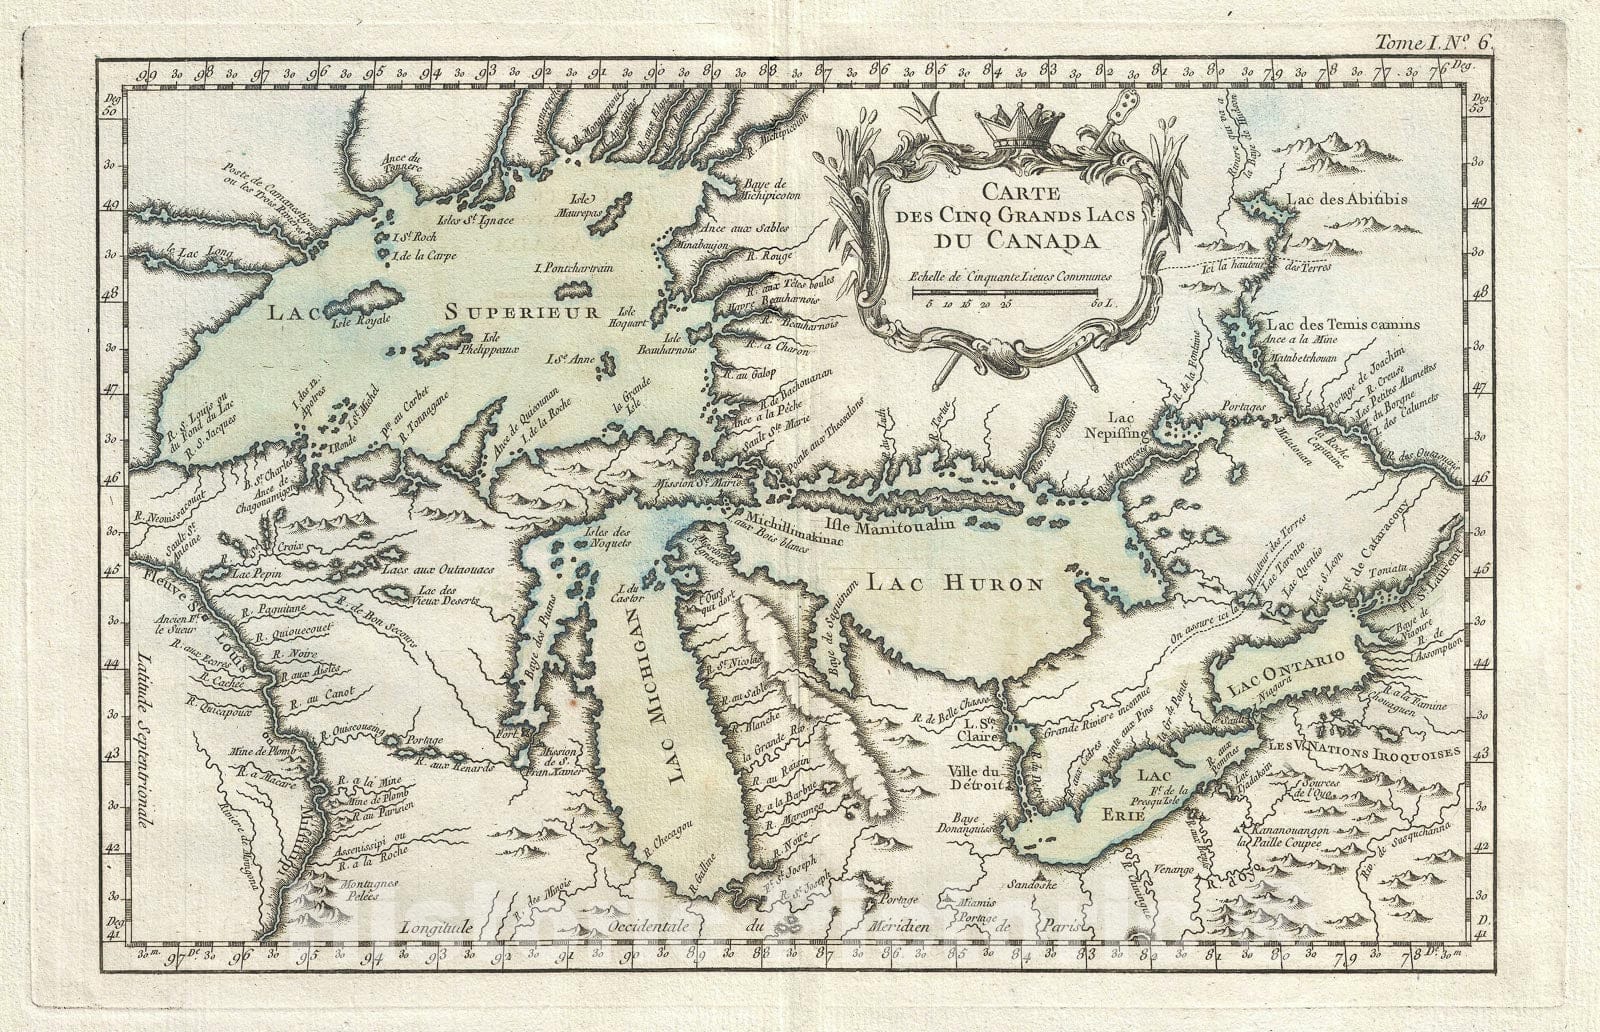 Historic Map : The Great Lakes "first map to use The term 'Great Lakes'", Bellin, 1764, Vintage Wall Art